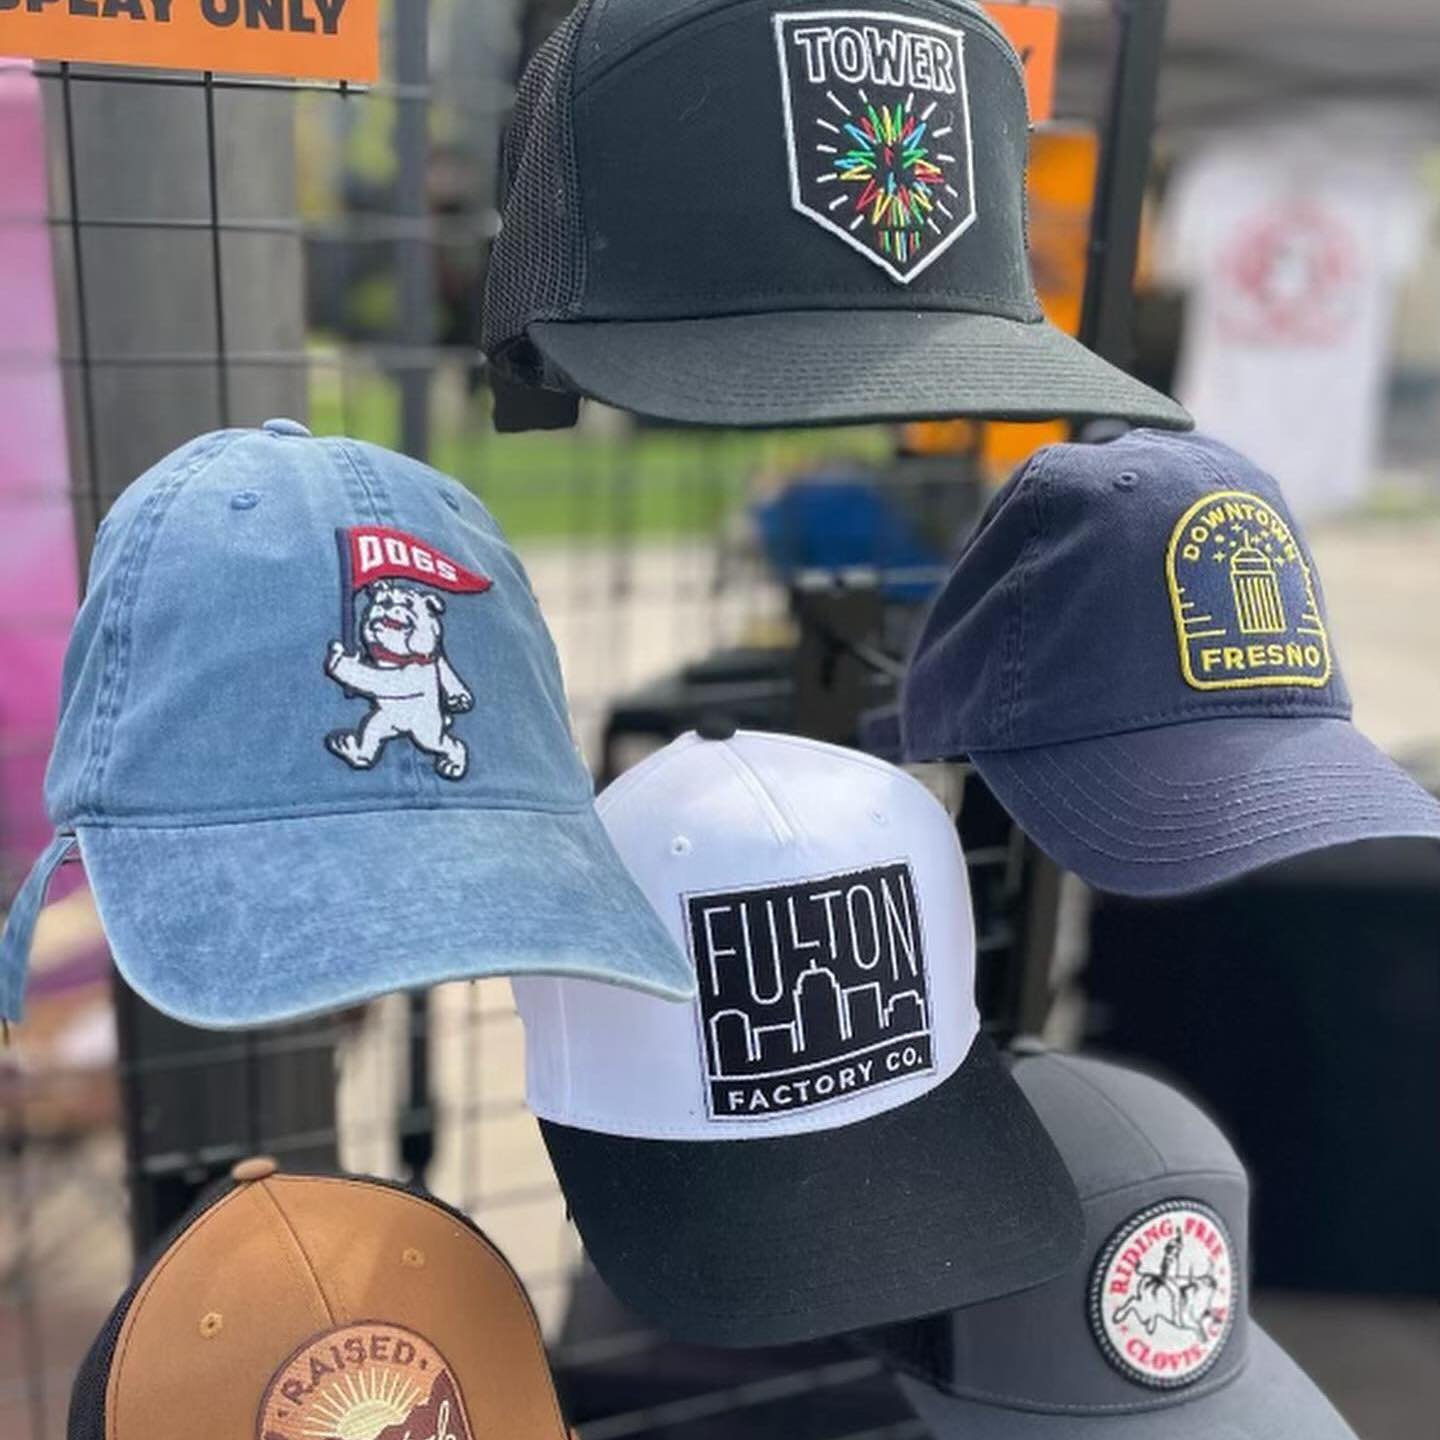 Check out these original designs from @fulton_factory at the Old Town Flea! This business is Central Valley proud and we love to see it 😍  Supporting and cheering on our community and all its small businesses is our most favorite thing!